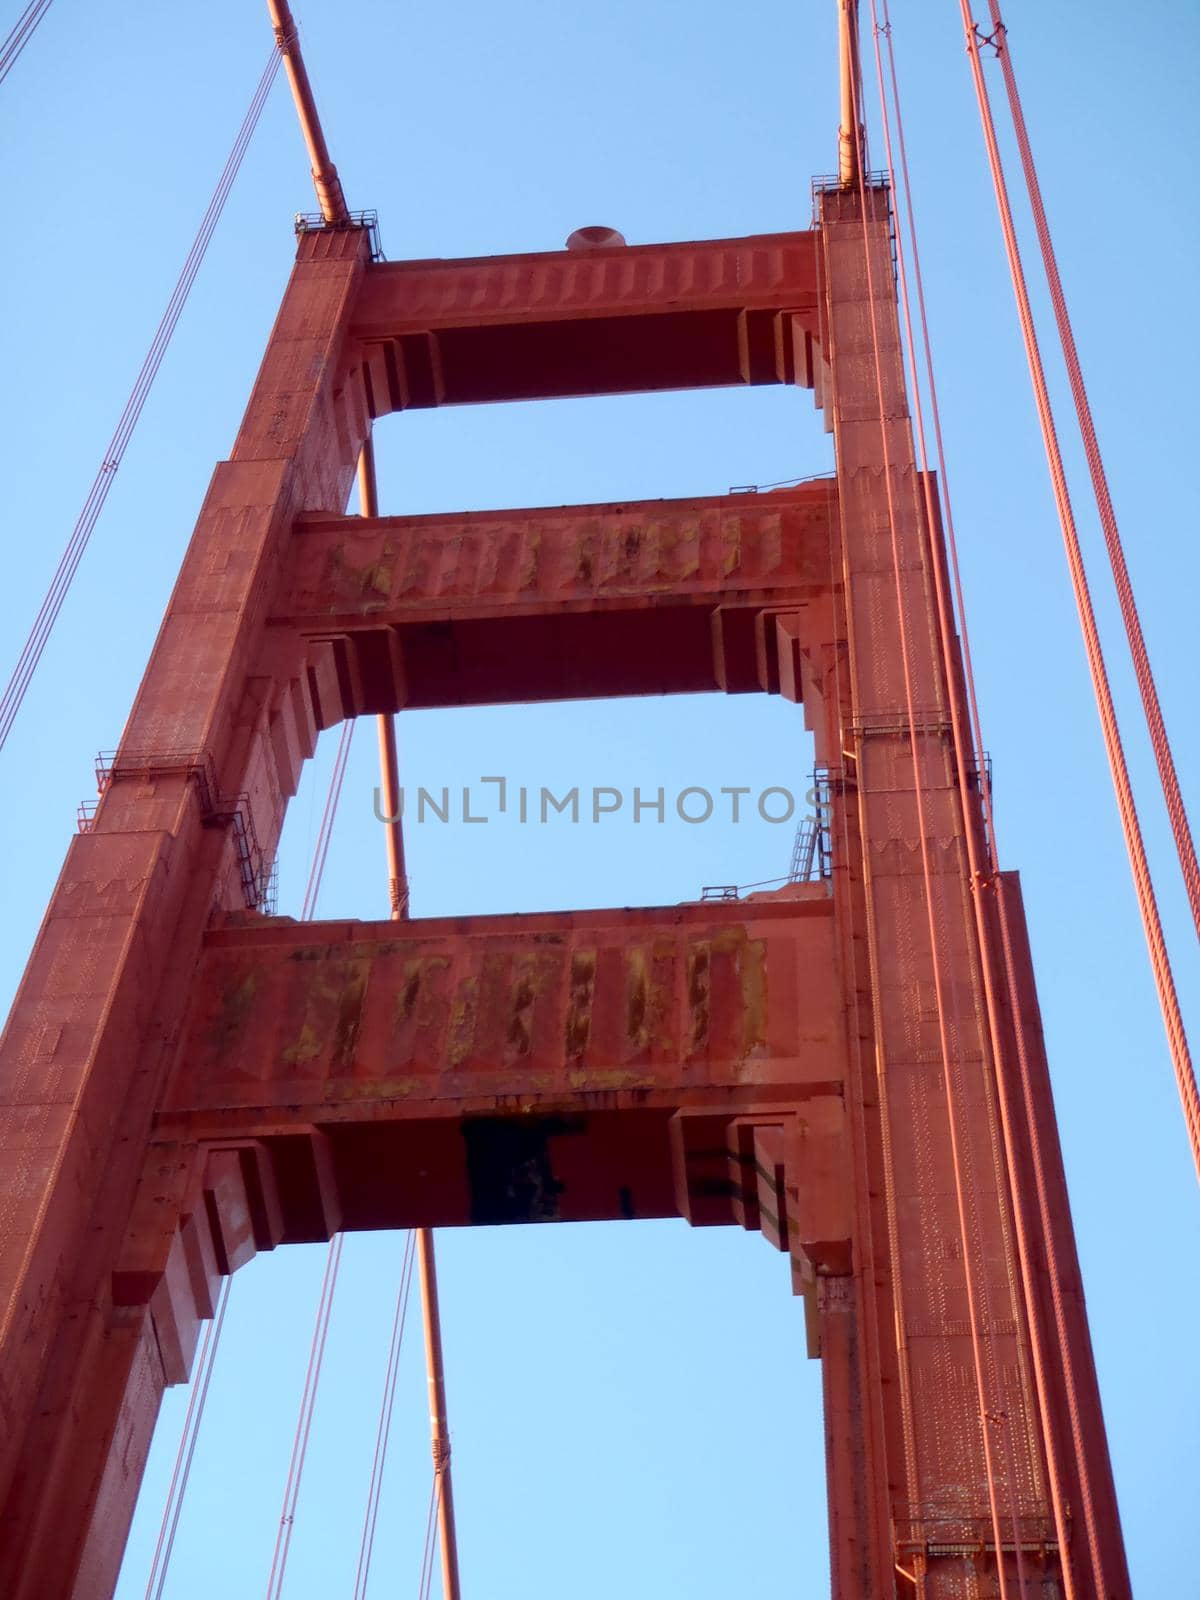 Upward perspective of Art Deco Tower and supporting cables on the Golden Gate Bridge.